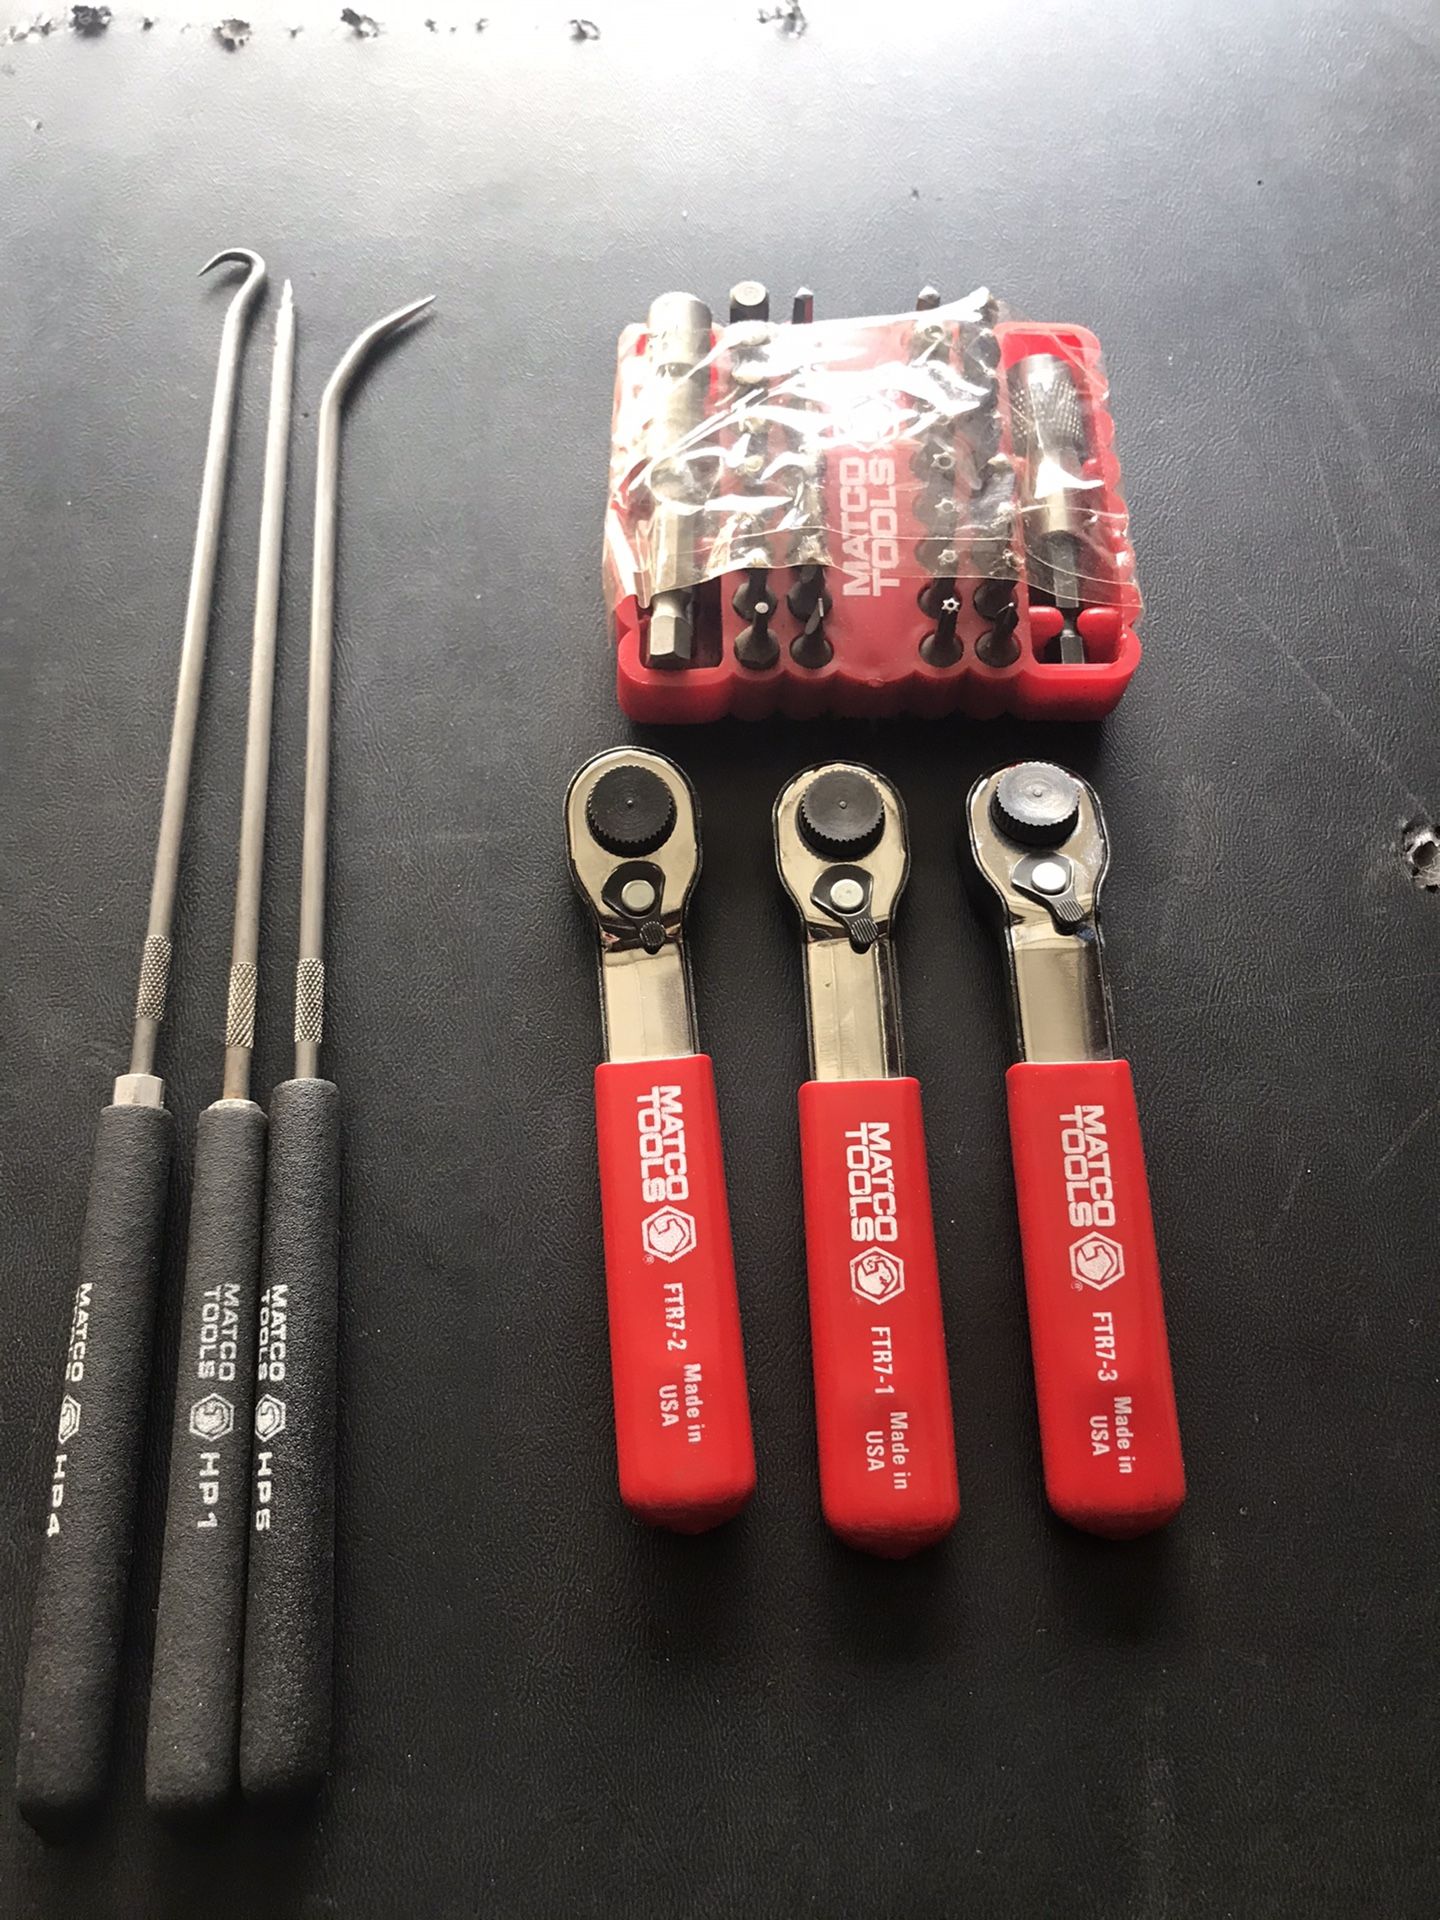 3 PCS MATCO 72 TOOTH RATCHET WRENCH SET WITH 35 BITS SET AND 3 PCS PICKS WITH CUSHIONS HANDLE (SAME LIKE SNAP ON TOOLS )